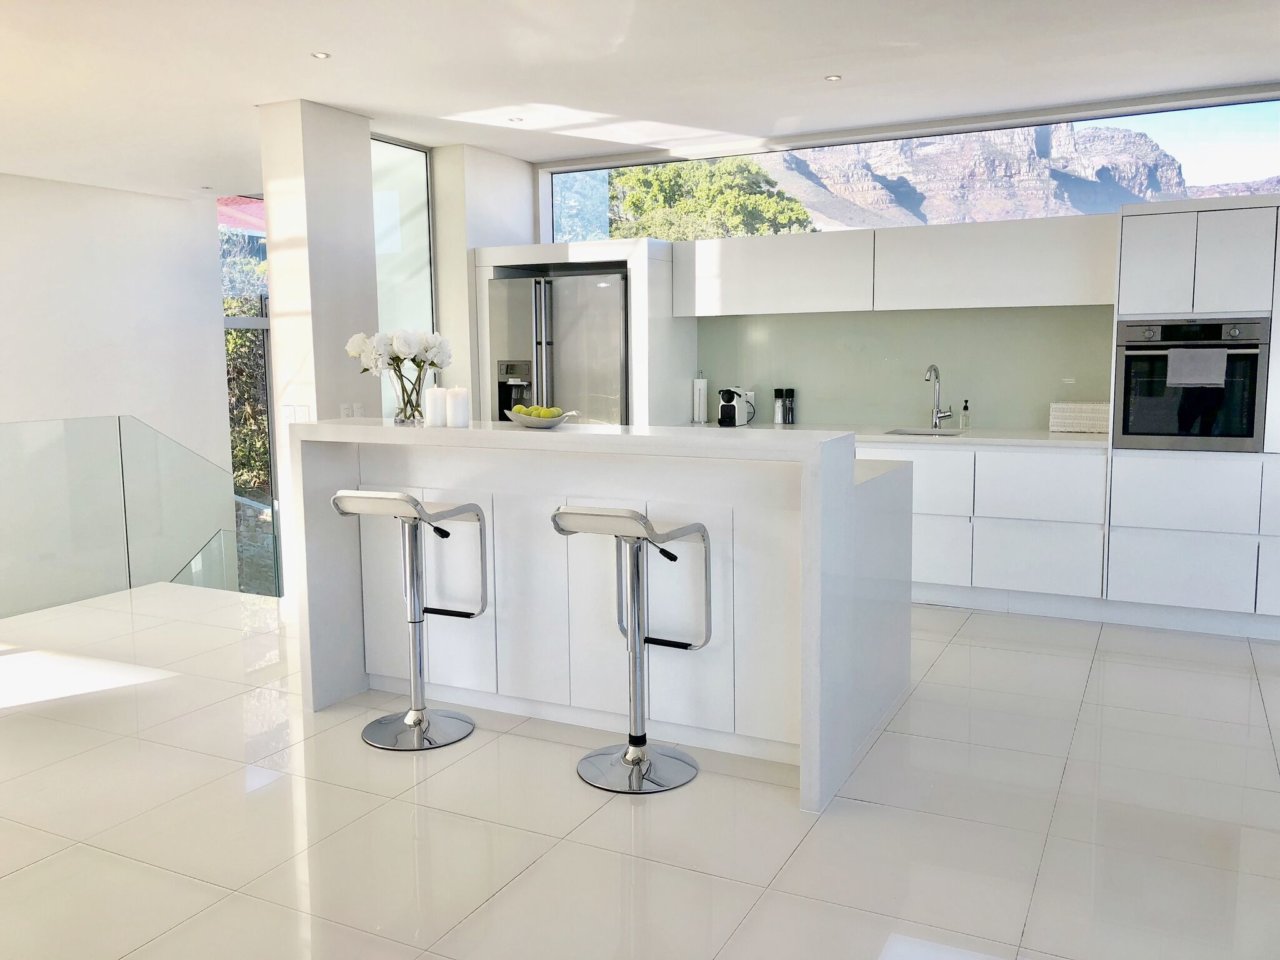 Photo 34 of Aqua Penthouse accommodation in Camps Bay, Cape Town with 2 bedrooms and 2 bathrooms